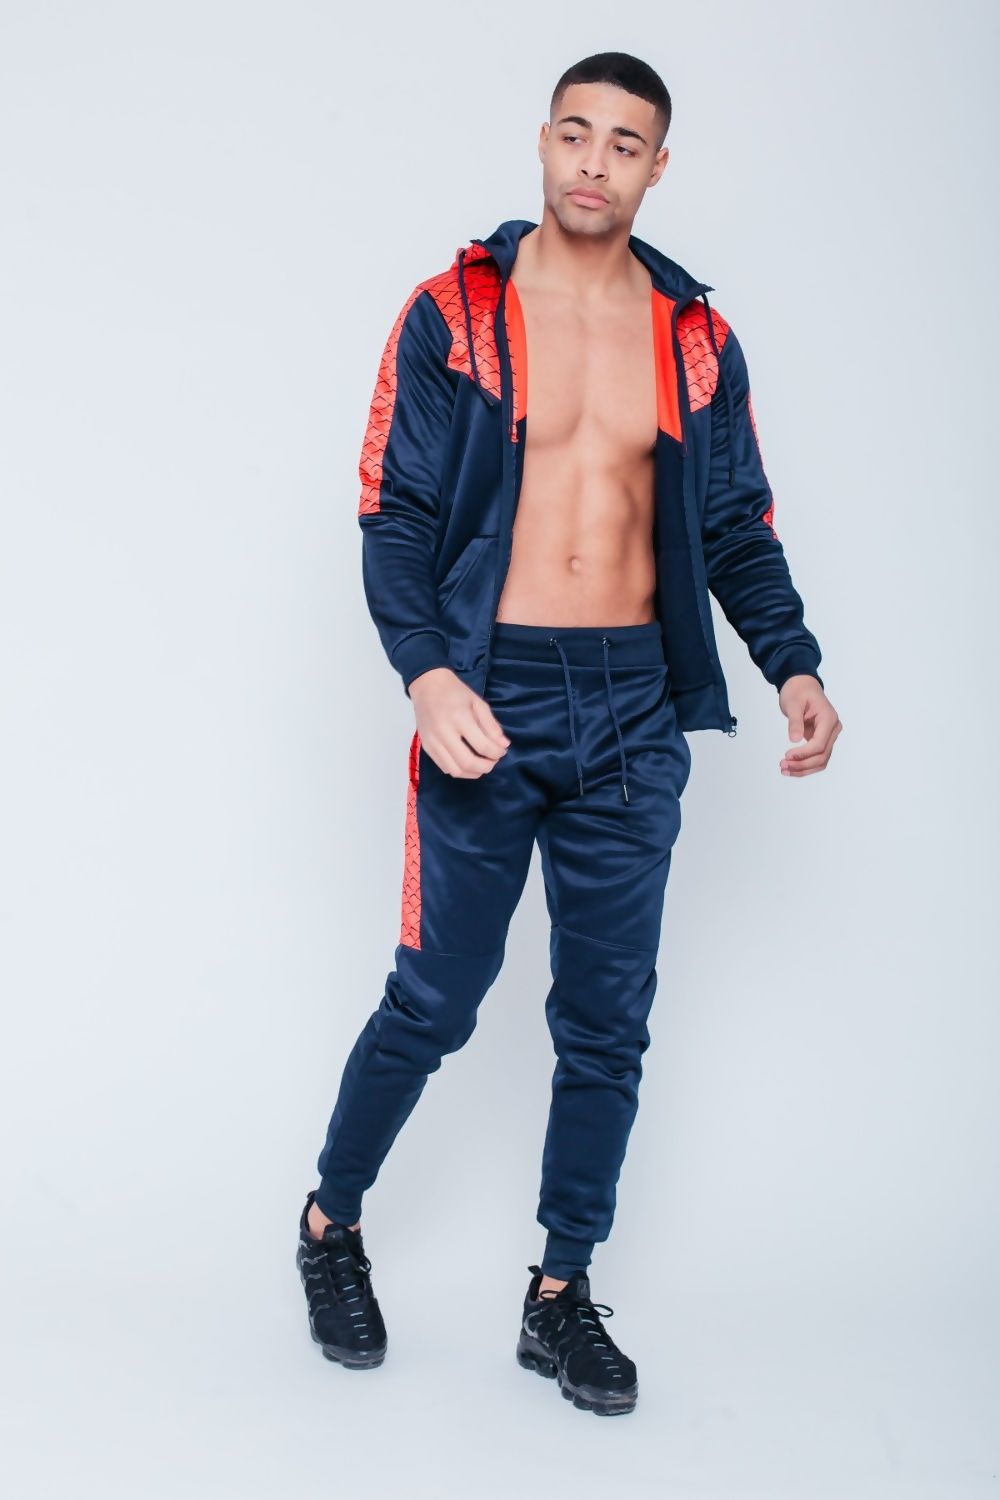 MENS SKINNY FIT HOODED TRACKSUIT NAVY CHEVRON PANEL